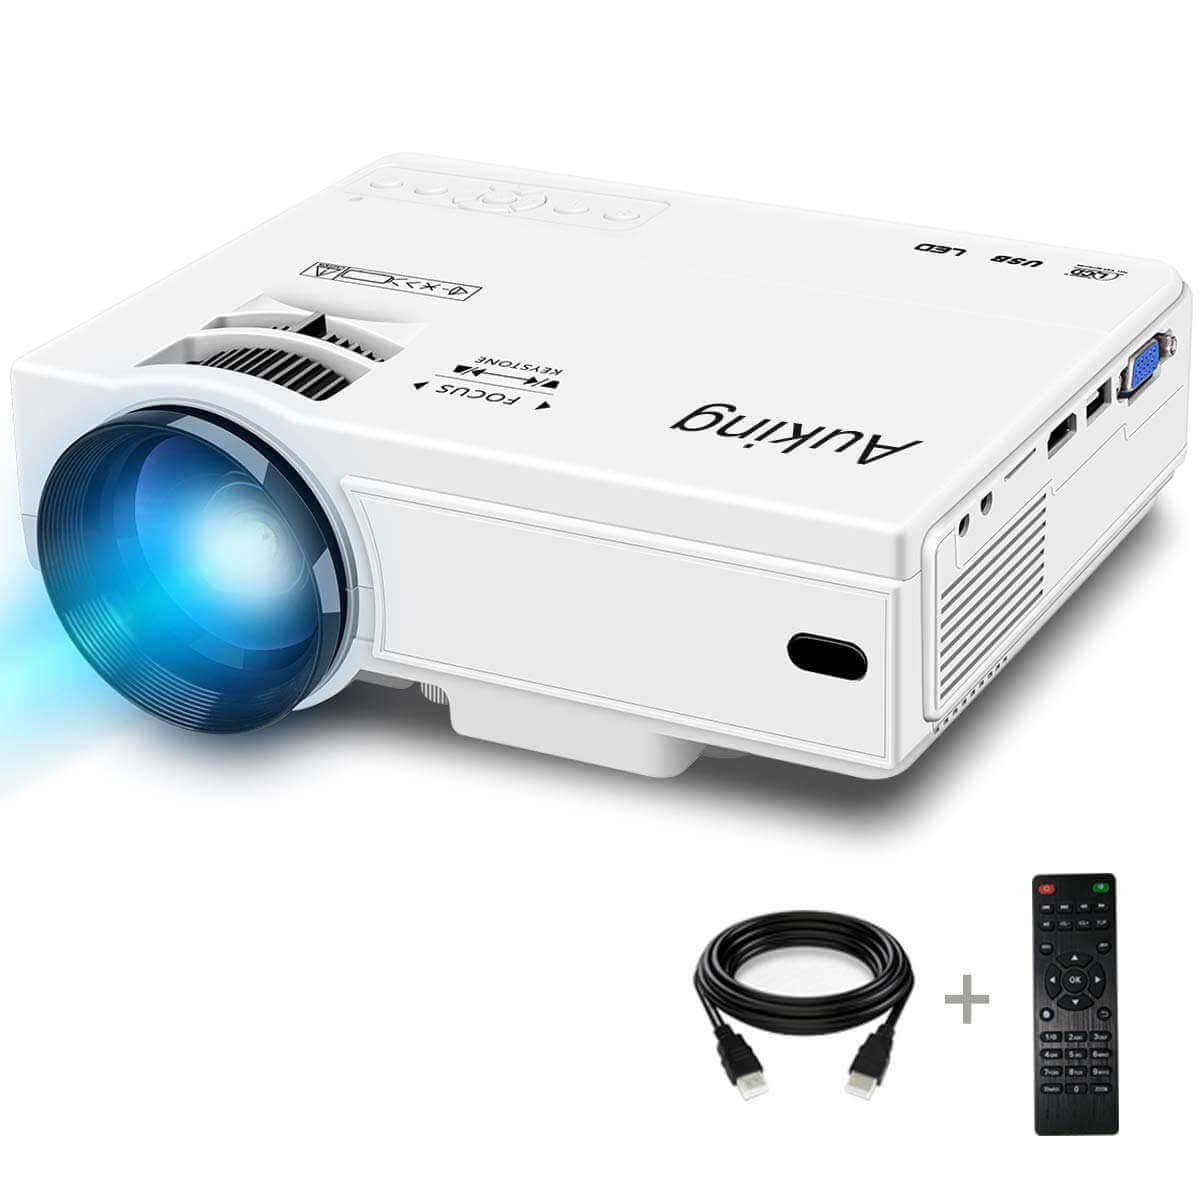 5 Trending Cyber Monday Mini Projector Deals for Sharp Images